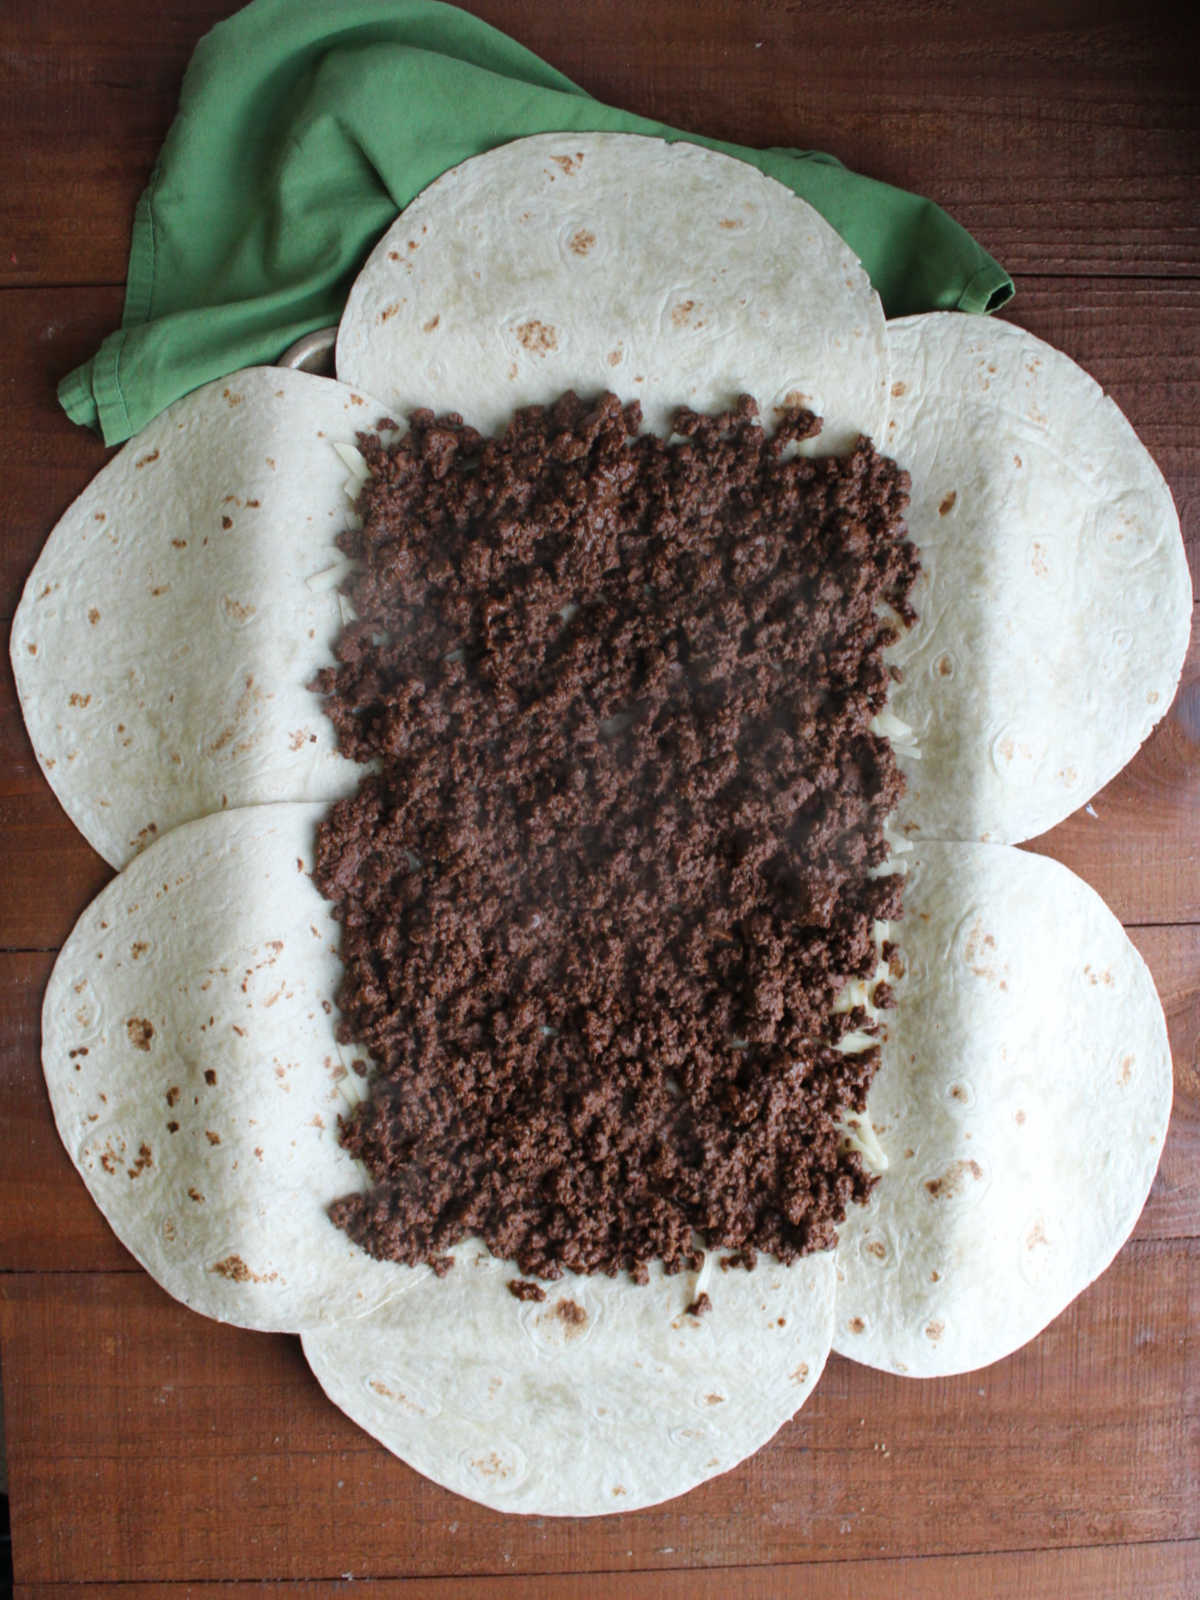 Taco seasoned ground venison spread out over the cheese layer.